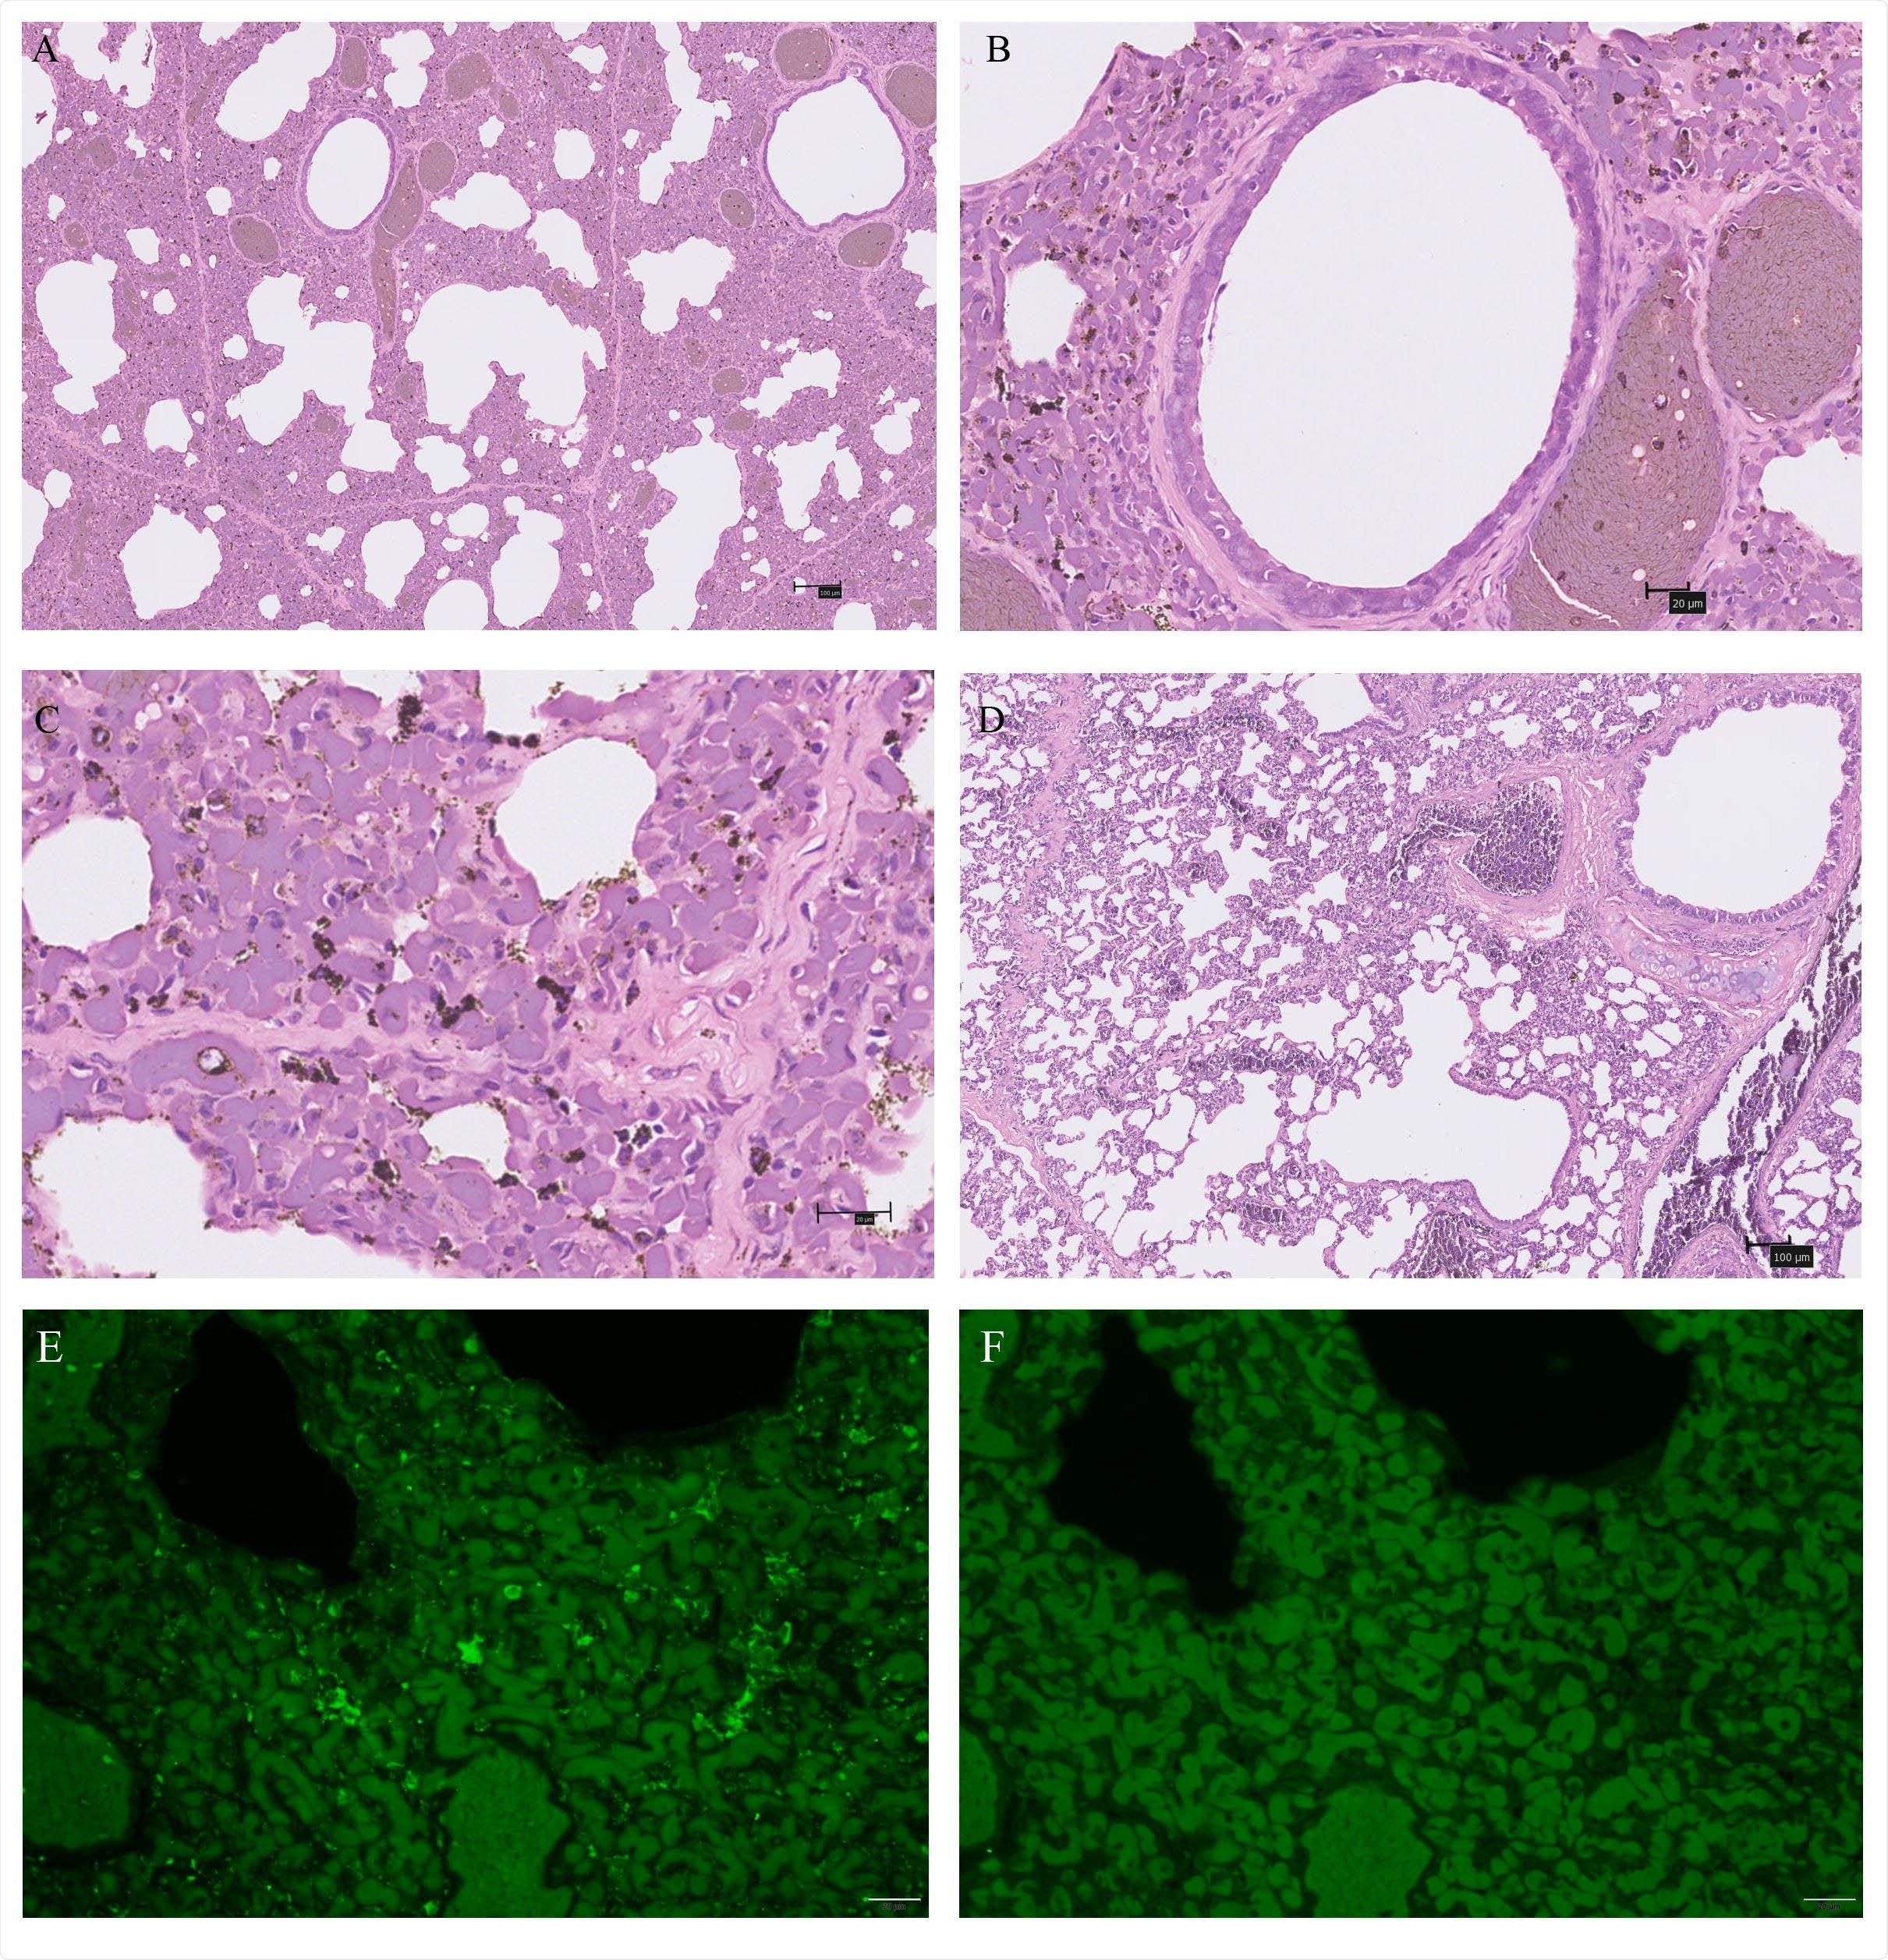 Characteristic pathological changes and virus antigen expression in the lungs of one SARSr-CoV-2 positive pangolin . (A-C) An autopsy lung with SARSr-CoV-2 infection compared to a negative one (D) were stained by hematoxylin and eosin (H&E). (B) bronchiectasis; (C) the interstitium and the walls of the alveoli thicken. (E-F) Immunofluorescence for virus antigen expression in pneumocytes. (E) nucleocapsid of SARS-CoV-2 (Green); (F) negative control. Scale bars of (A) and (D) are 100um, while others are 20um.